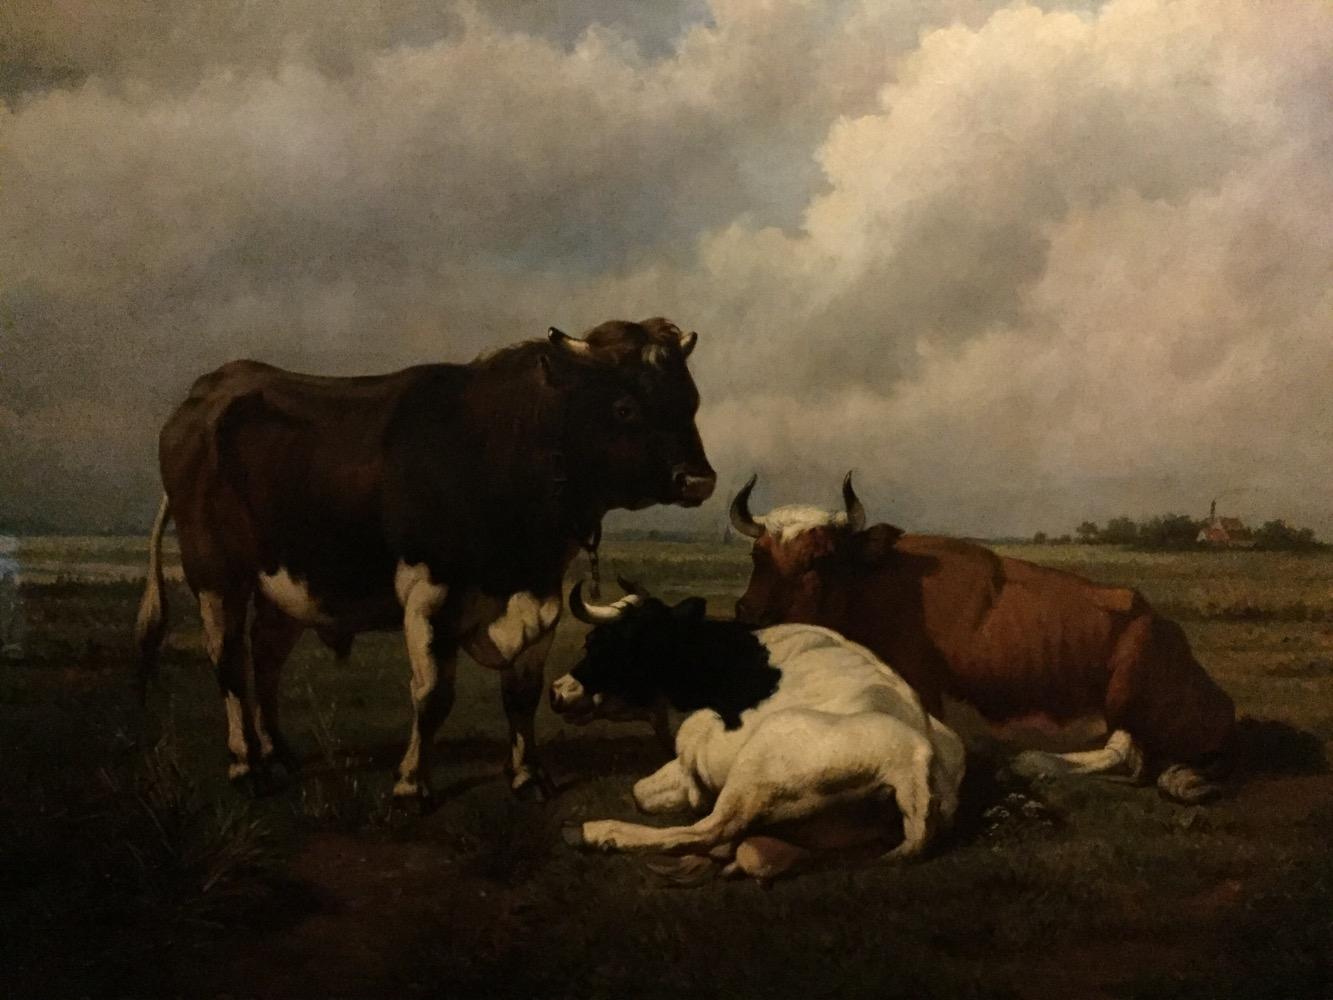 Bull with cows